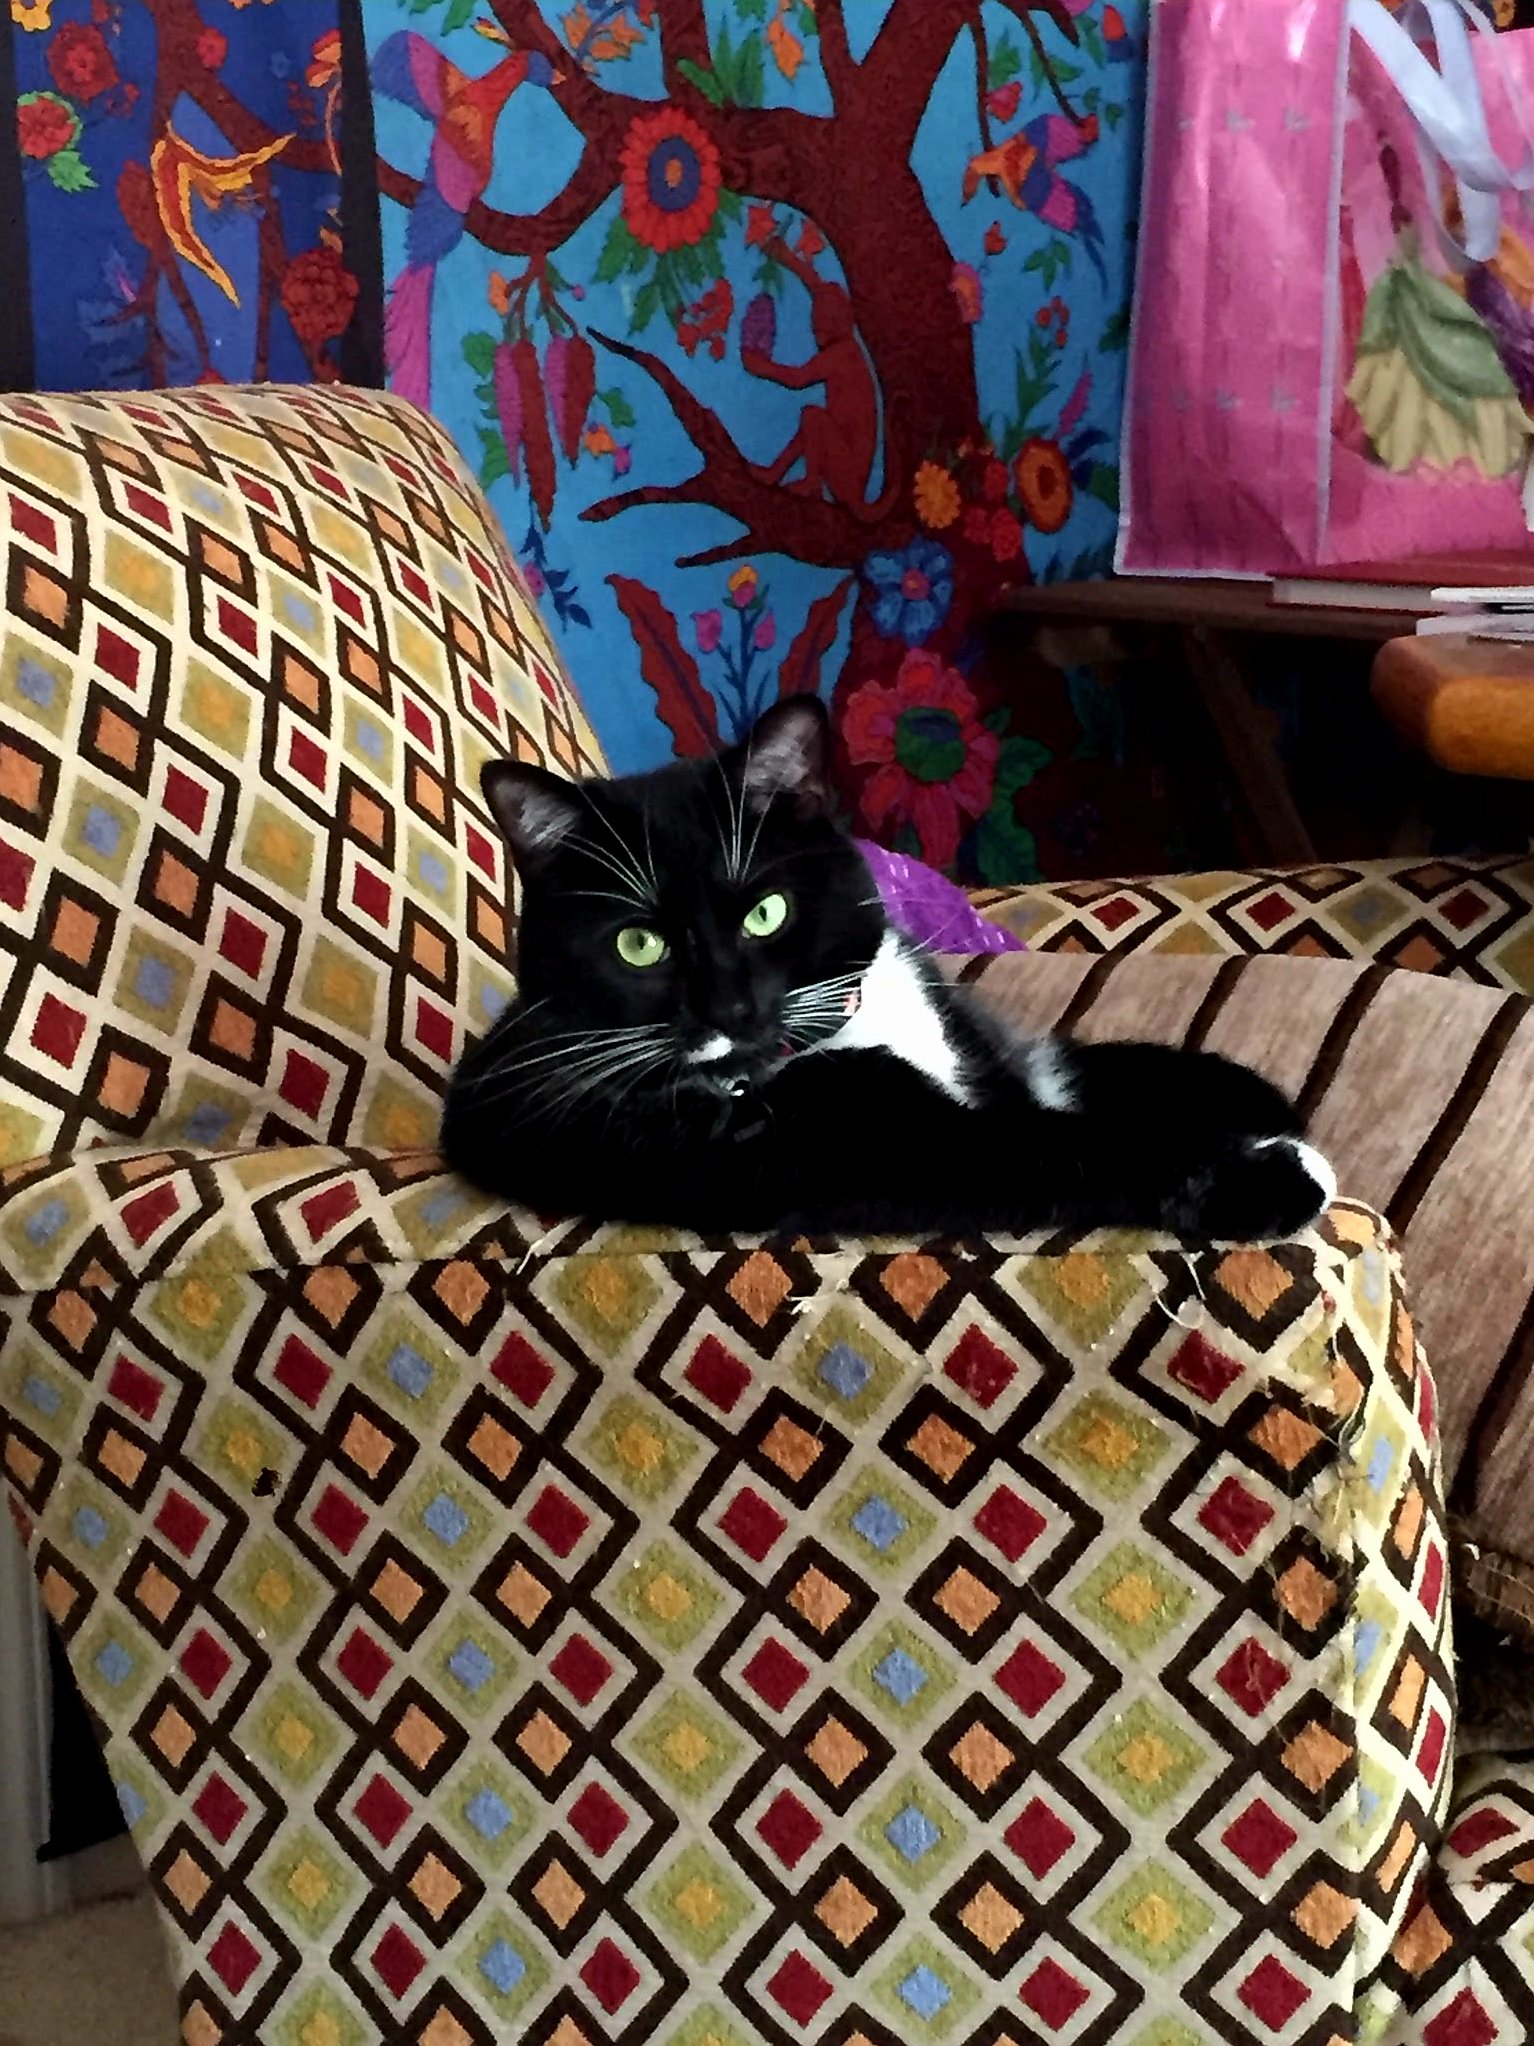 My sister got a picture of my cat looking like the most interesting cat in the world